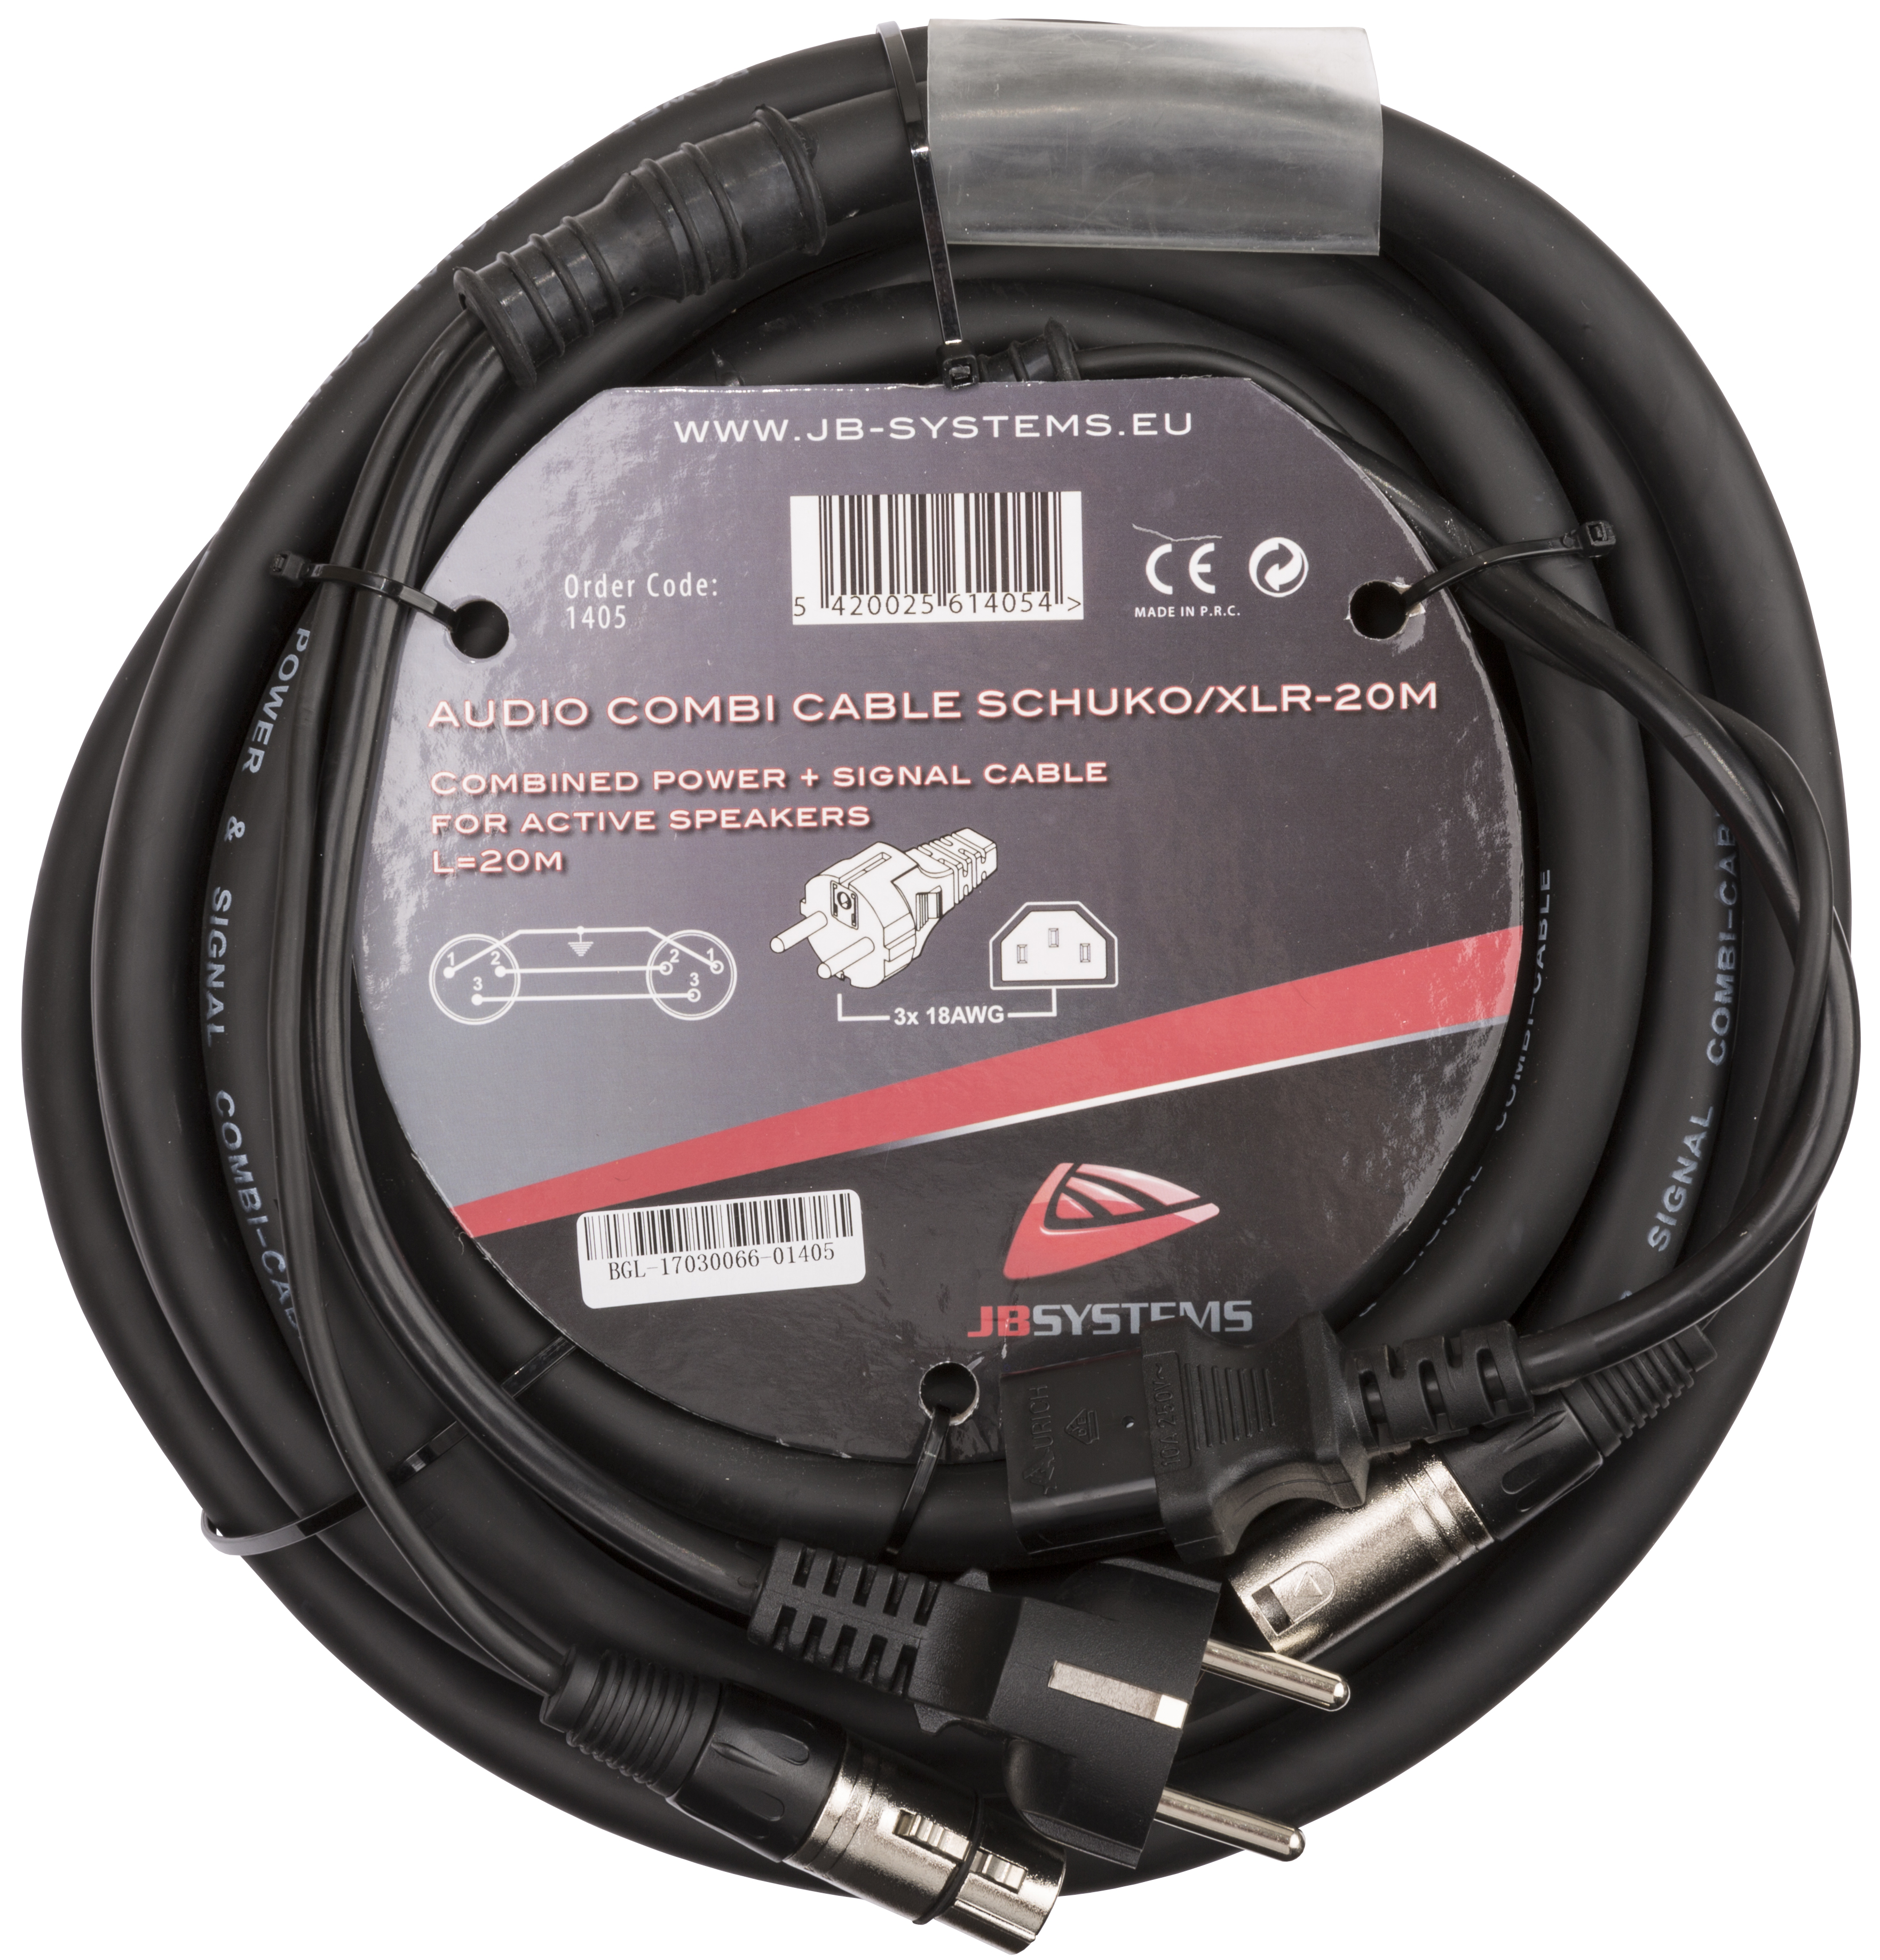 Power and signal combined in one 20m cable : Schuko, IEC and 3pin XLR